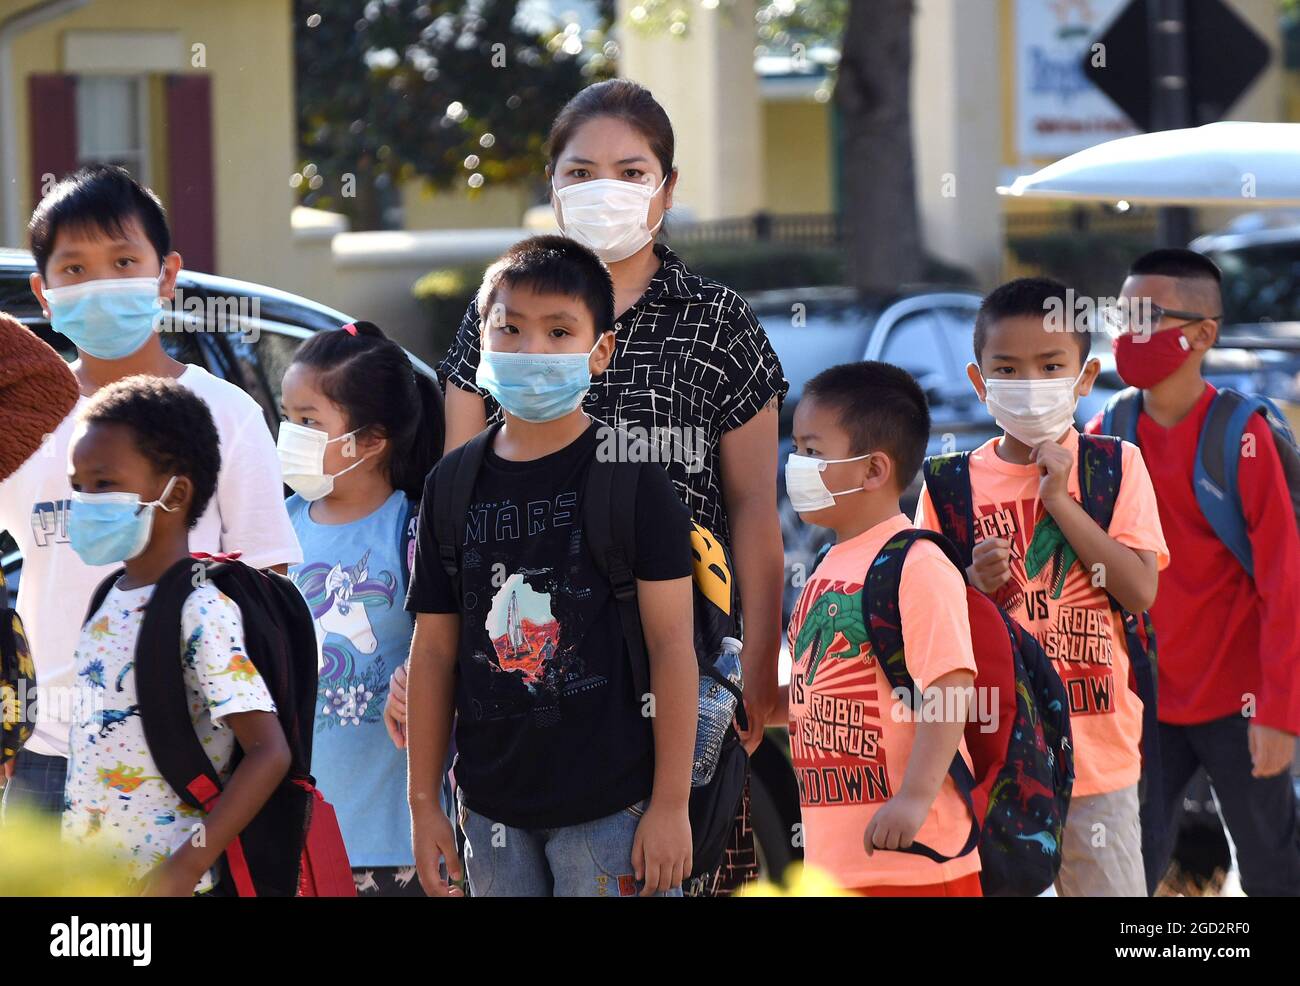 Orlando, United States. 10th Aug, 2021. Students wearing face masks arrive on the first day of classes for the 2021-22 school year at Baldwin Park Elementary School. Due to the current surge in COVID-19 cases in Florida, Orange County public schools have implemented a face mask mandate for students for 30 days unless a parent chooses to opt out of the requirement. Credit: SOPA Images Limited/Alamy Live News Stock Photo